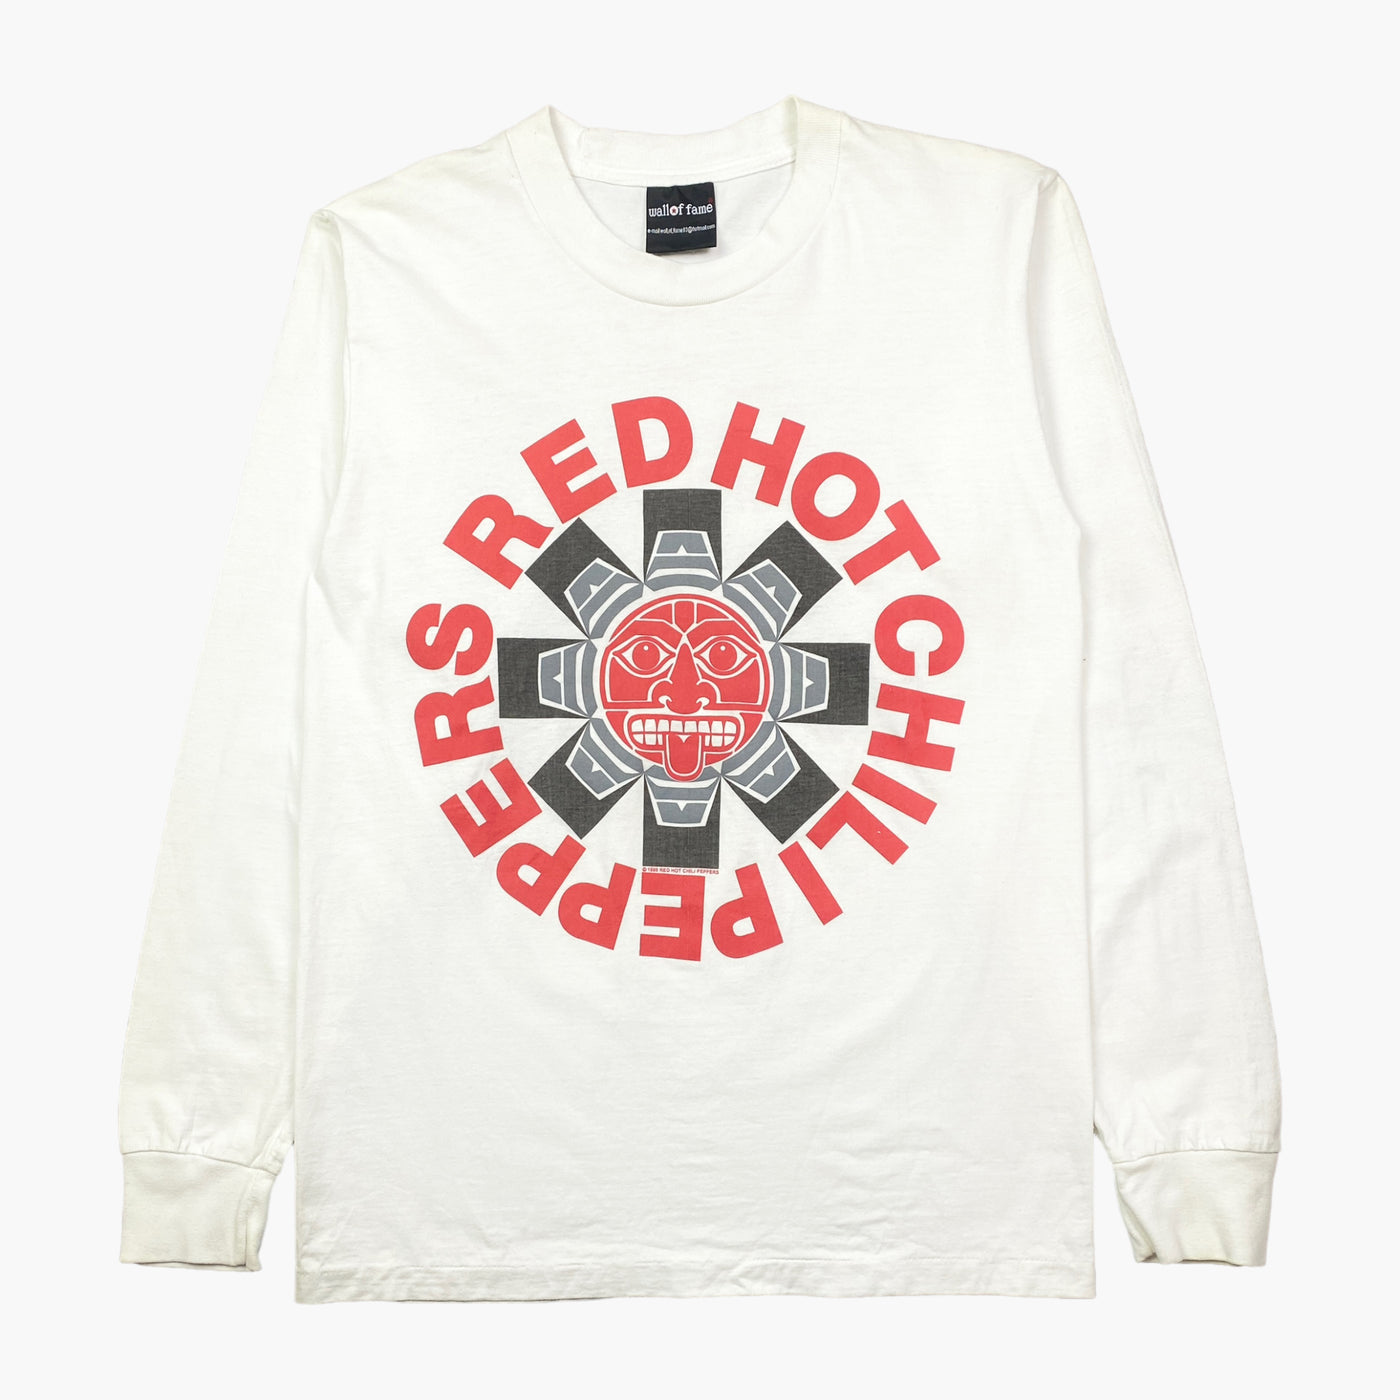 1998 RED HOT CHILLI PEPPERS LONG SLEEVE